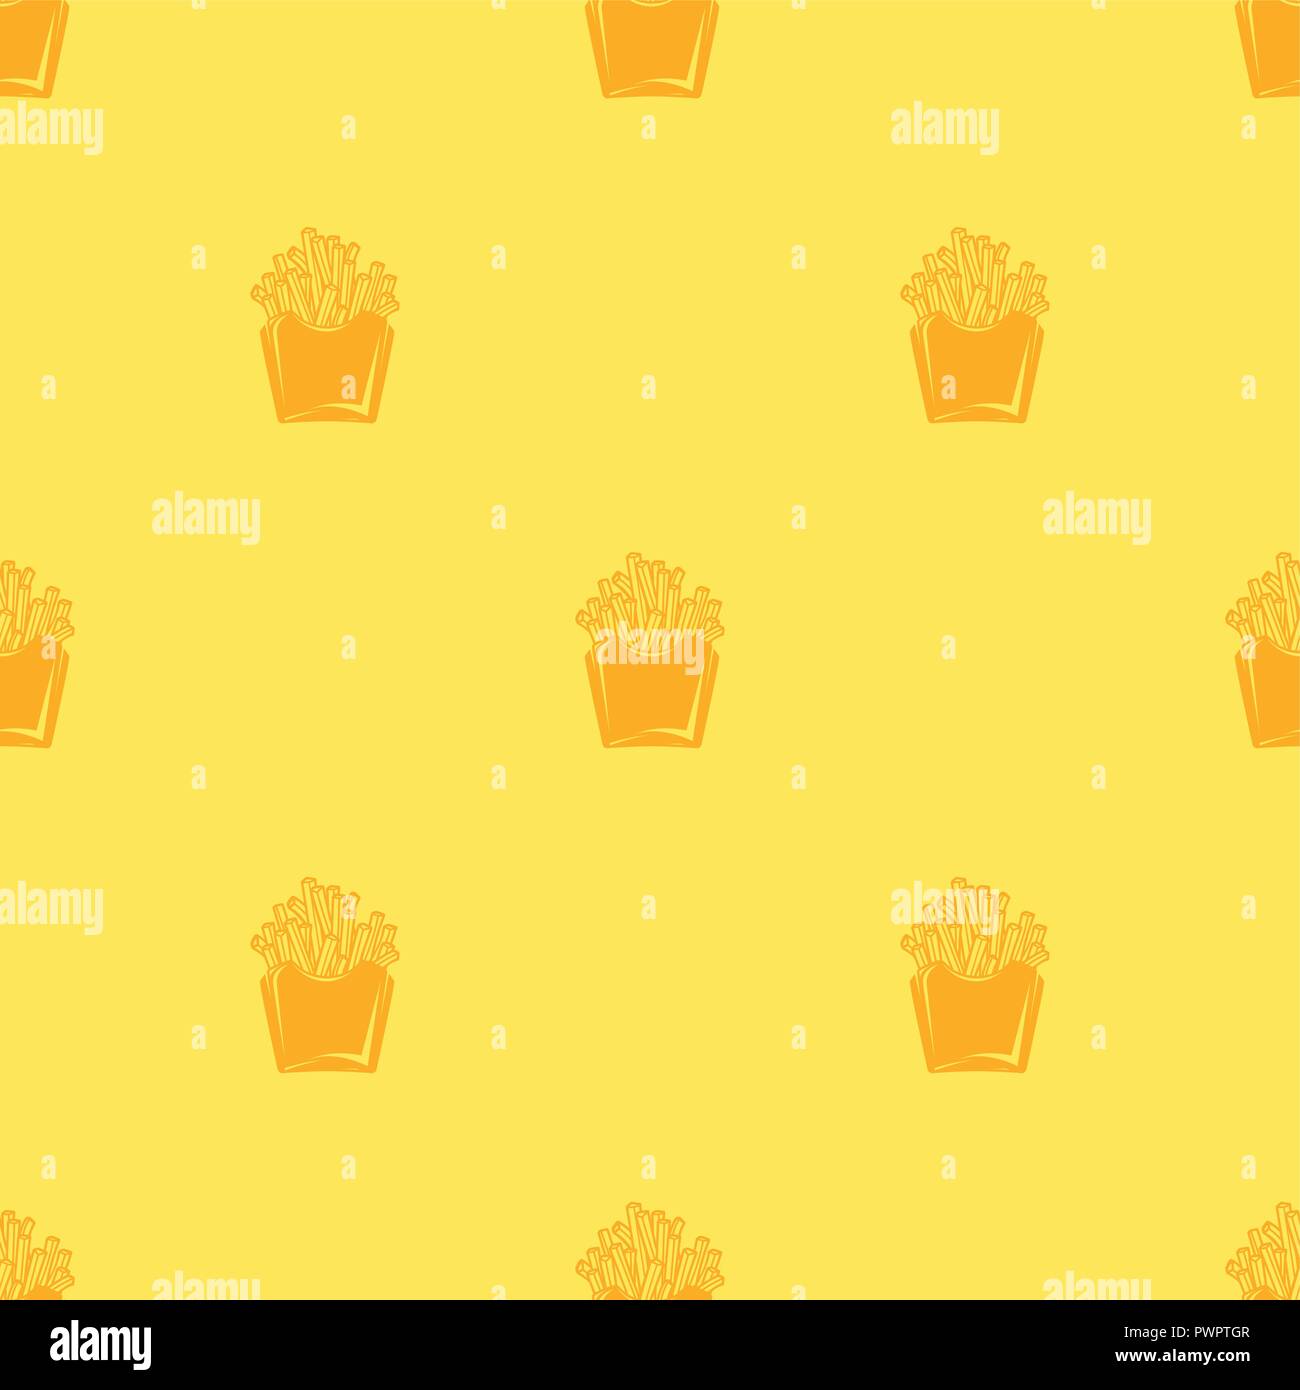 Seamless pattern vector minimalist French fries on yellow background template for your design Stock Vector